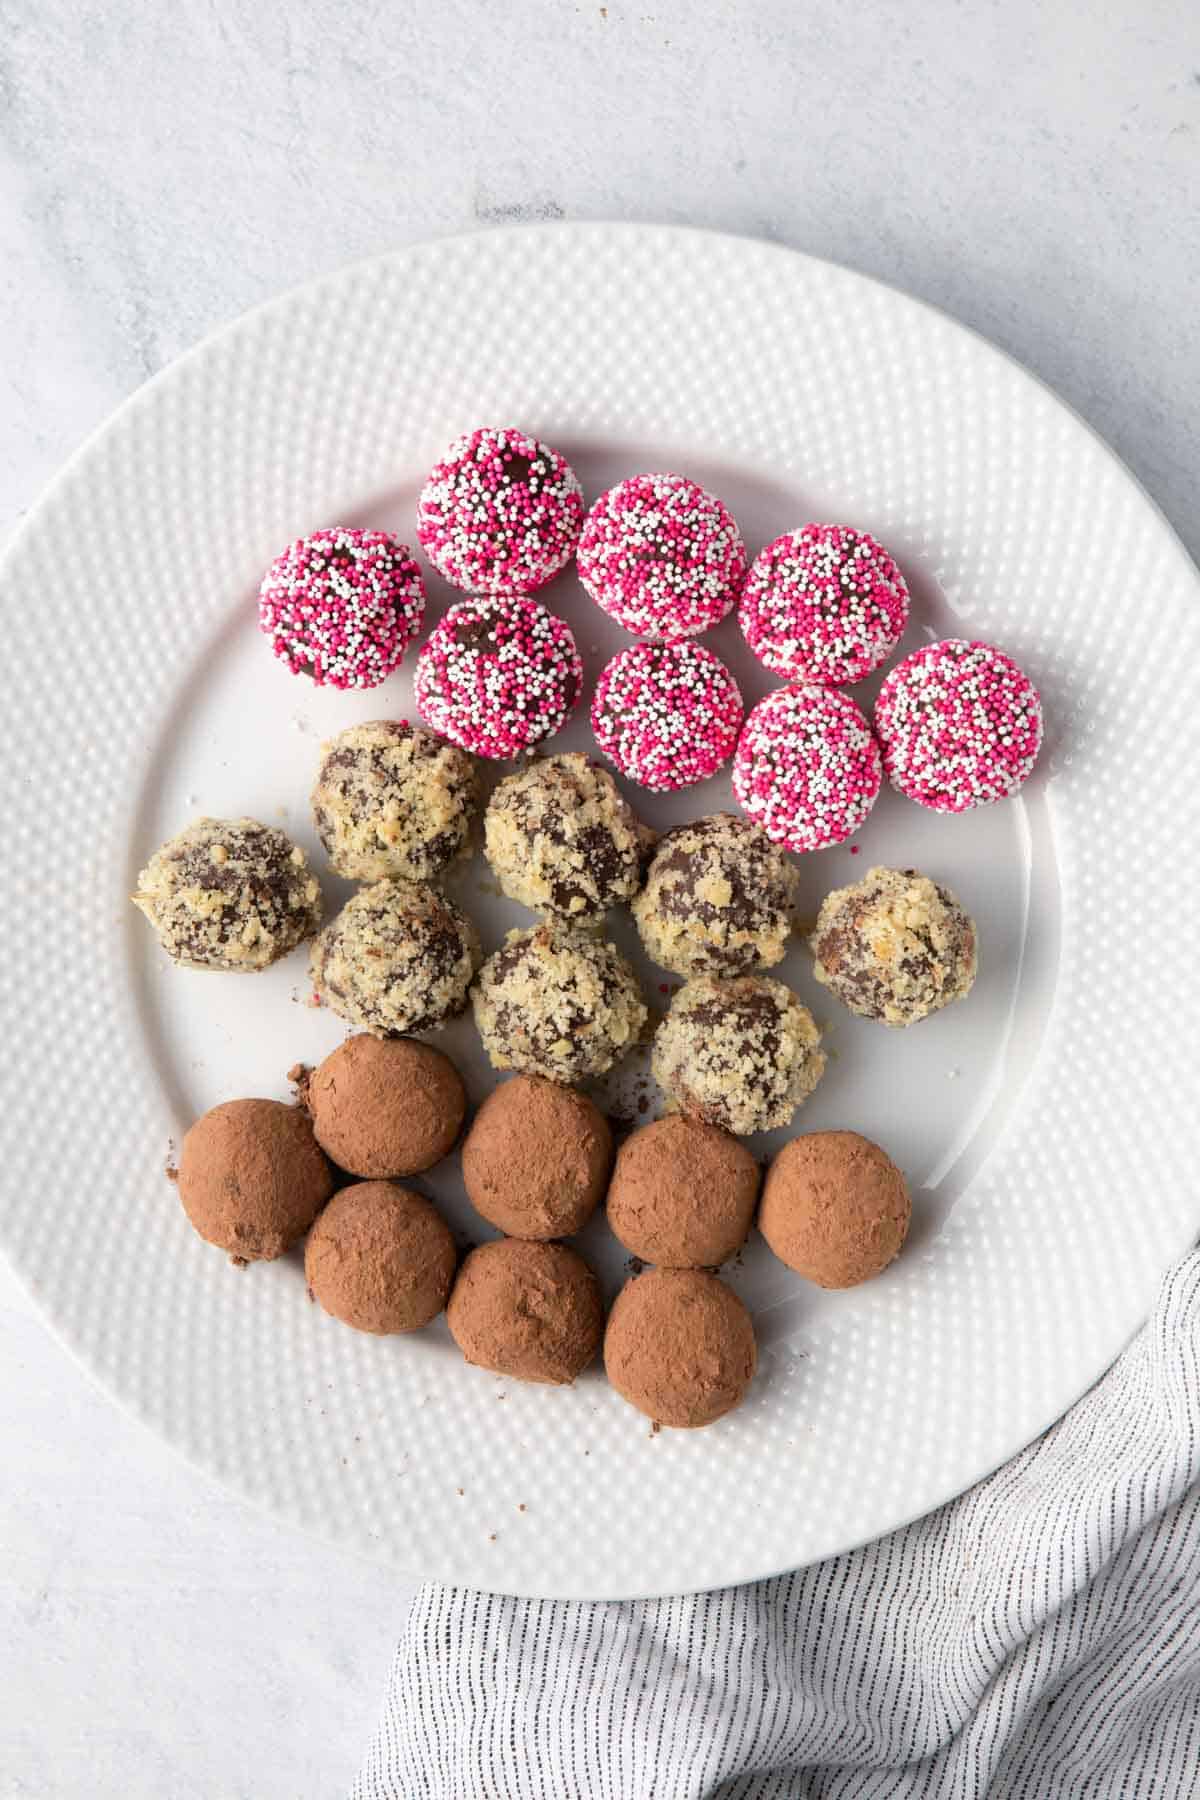 Plat of 24 chocolate truffles with 8 decorated each way: sprinkles, chopped nuts, and cocoa powder.